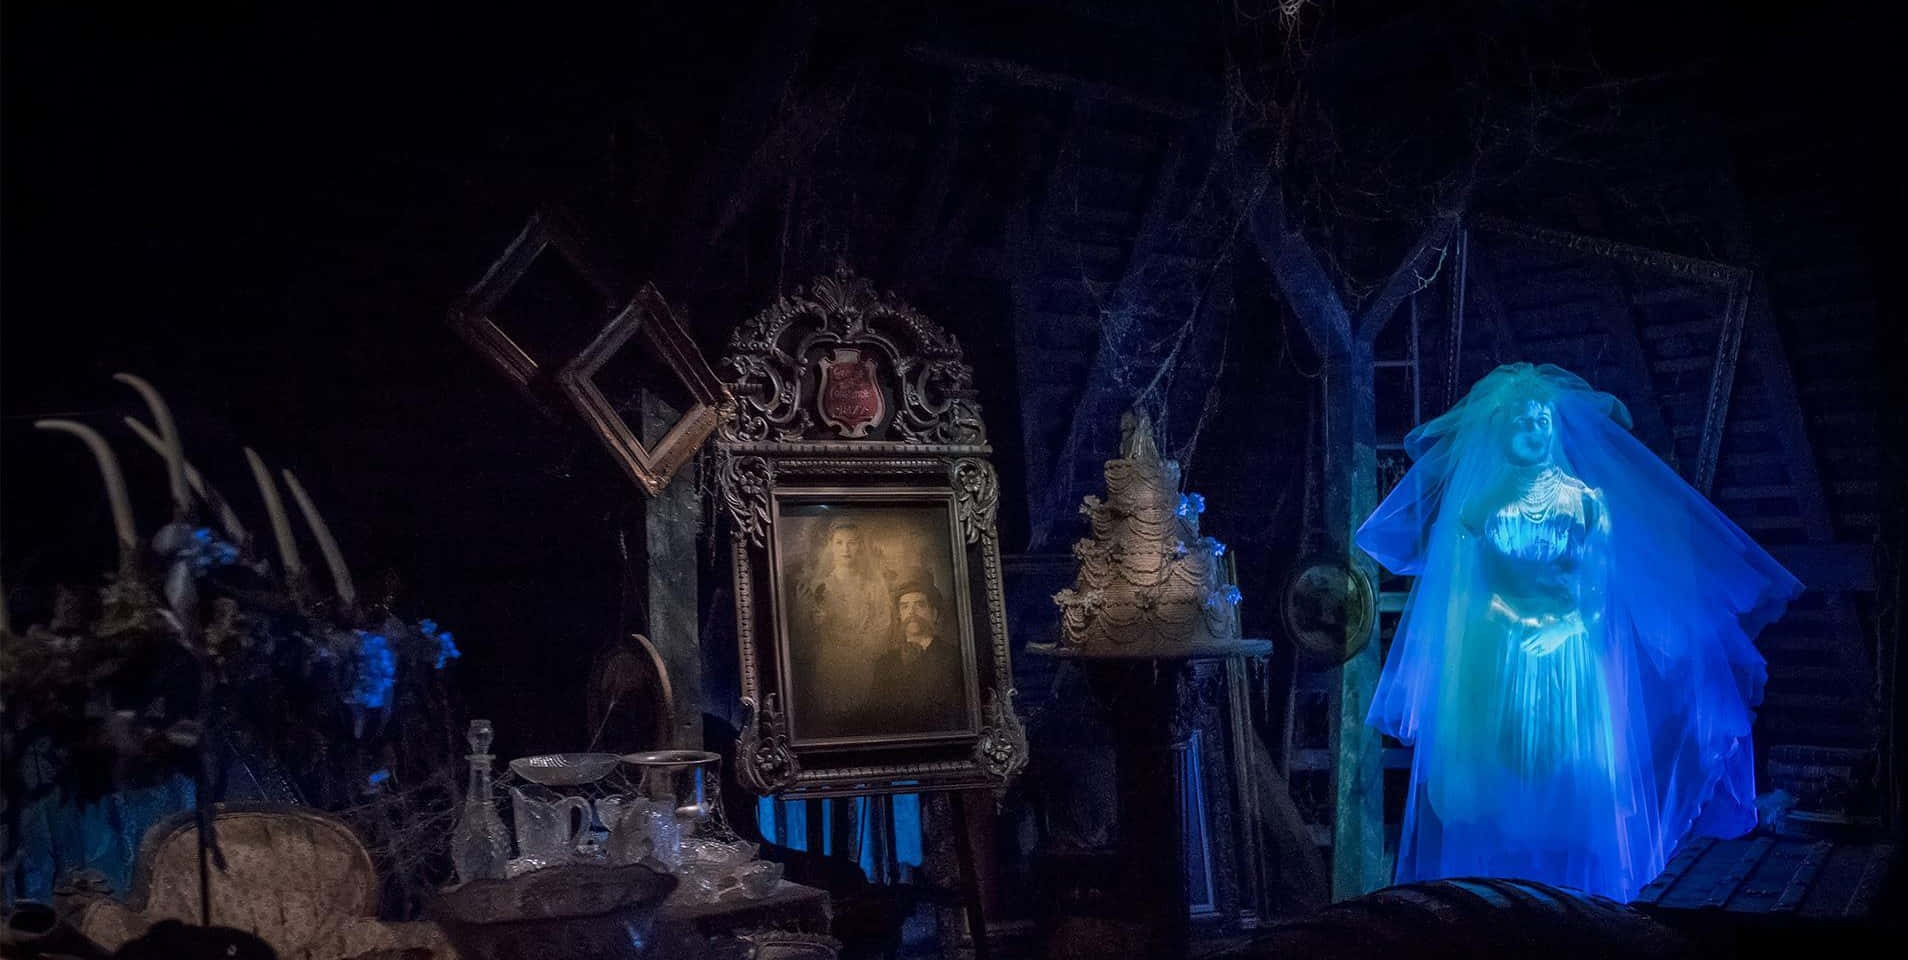 Pass beneath the spooky boughs of the Haunted Mansion.